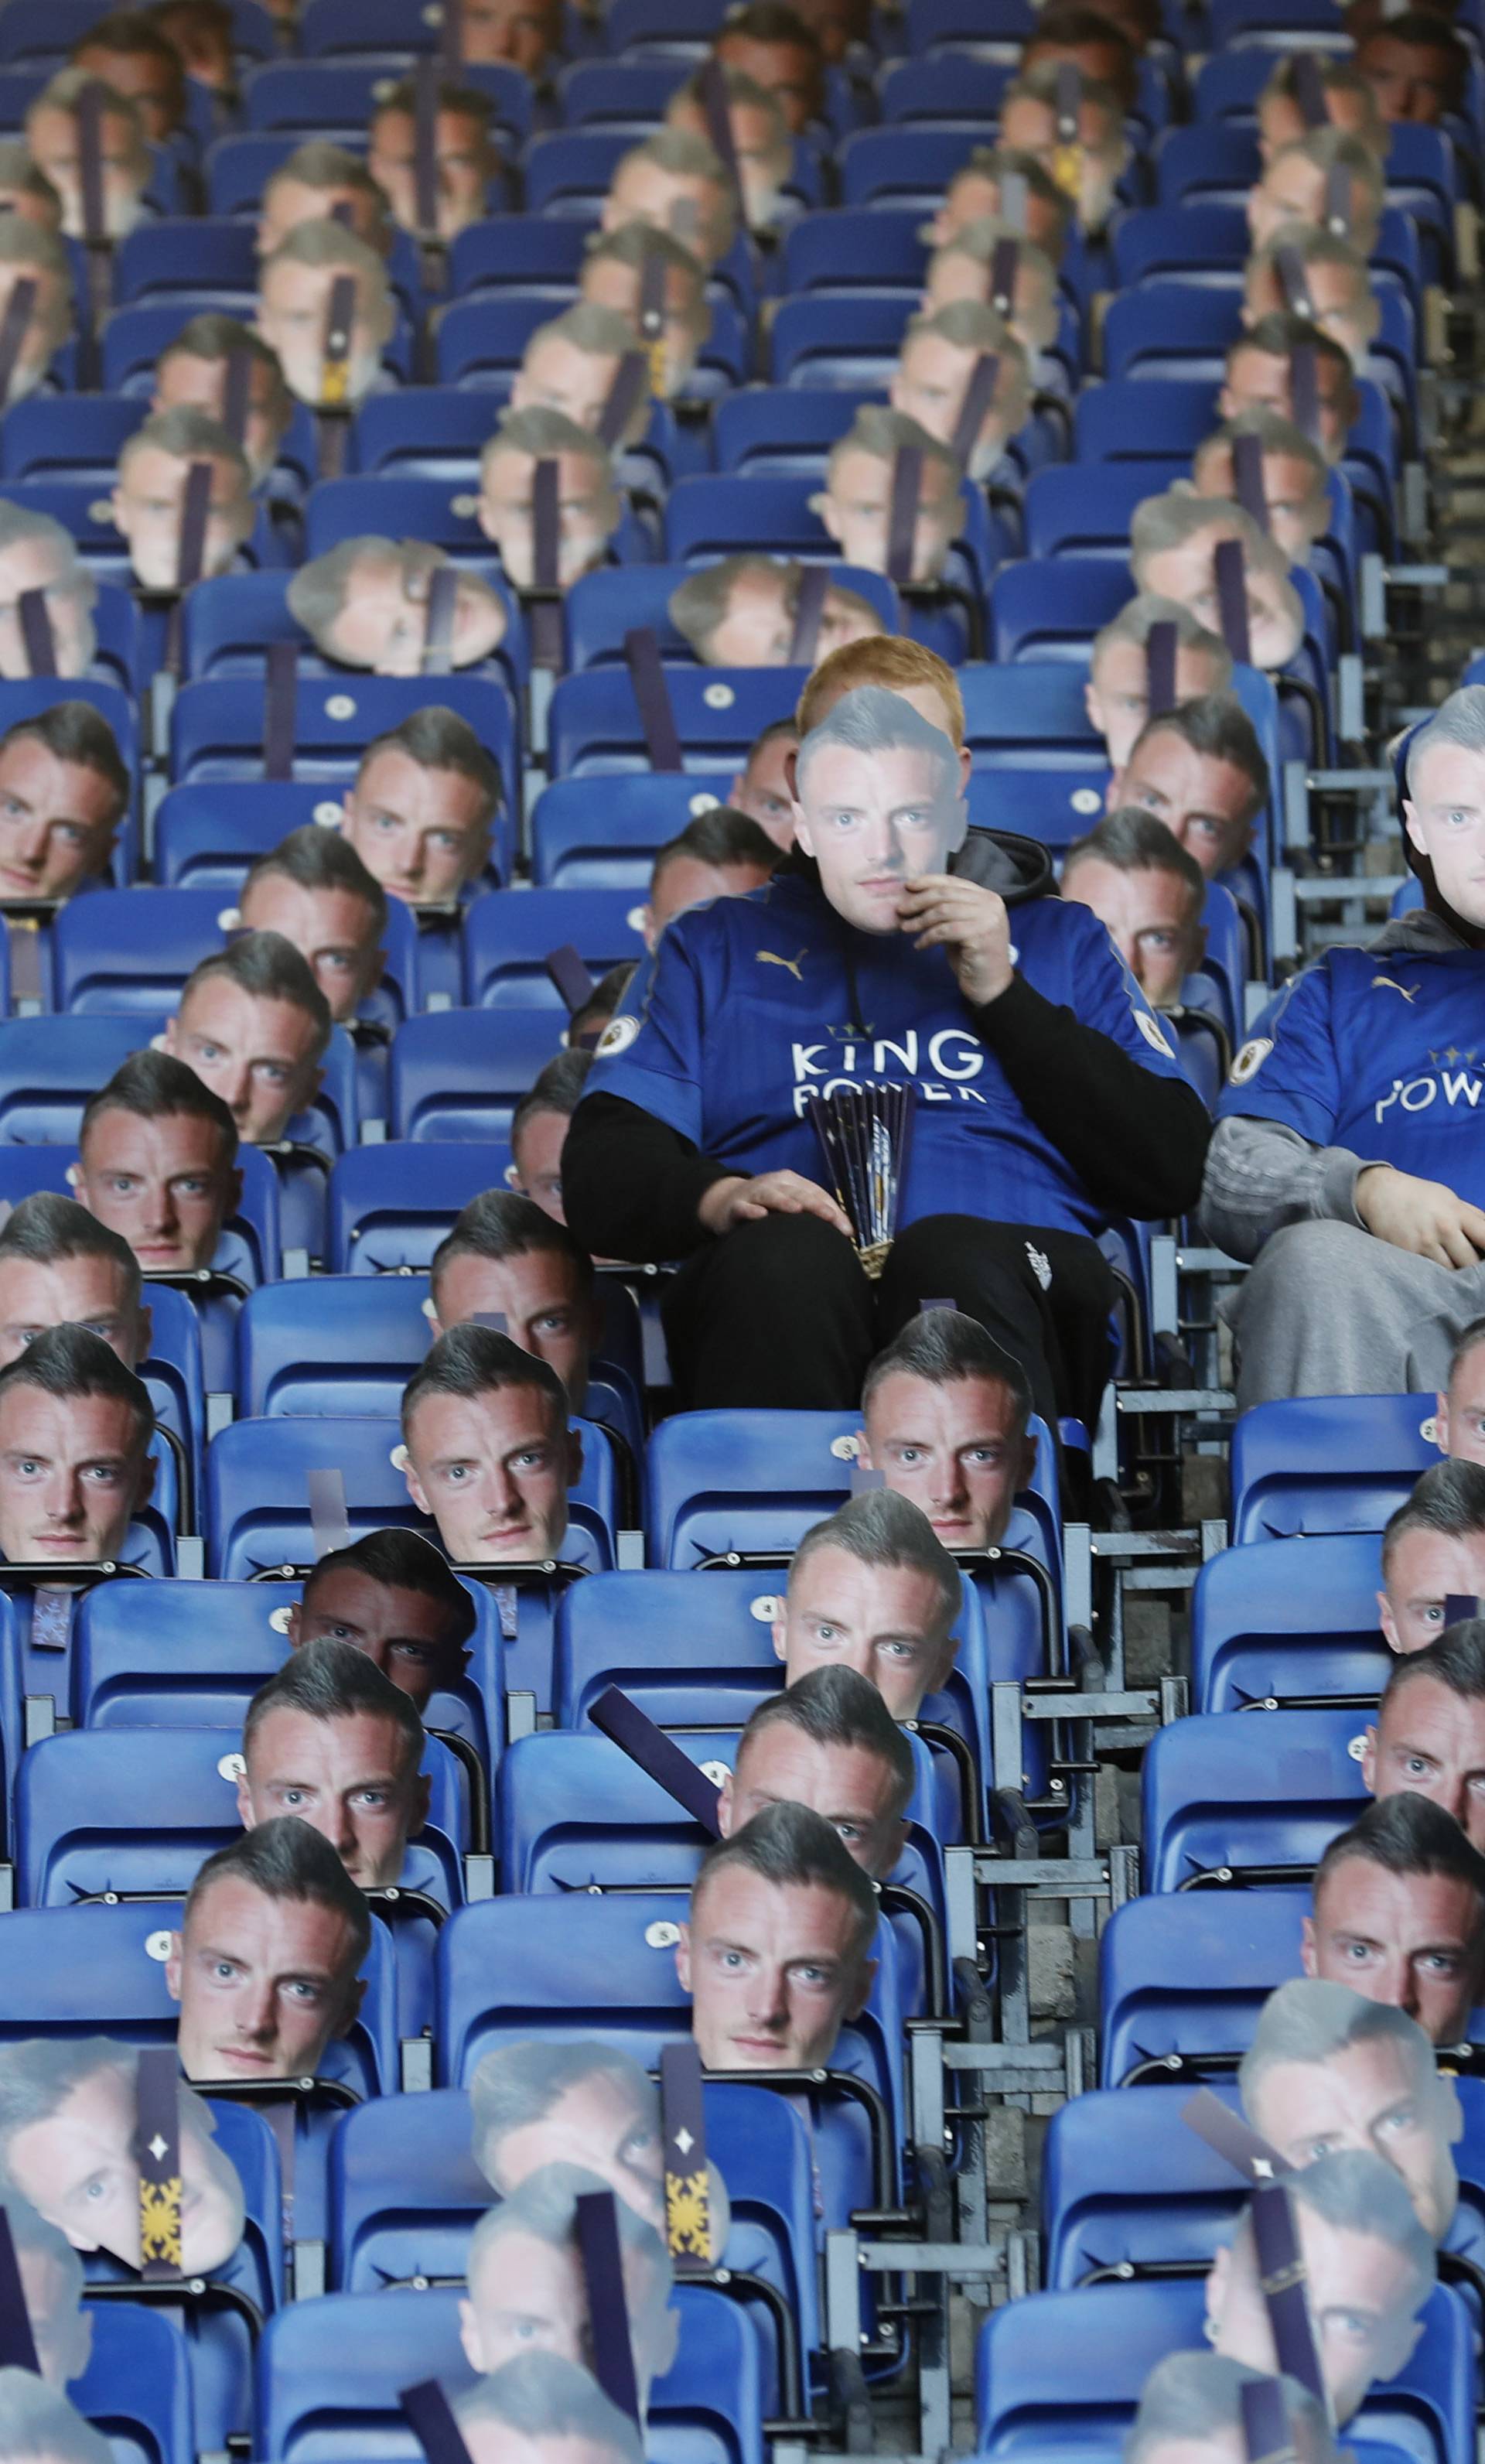 General view of Leicester City fans with Jamie Vardy masks before the match